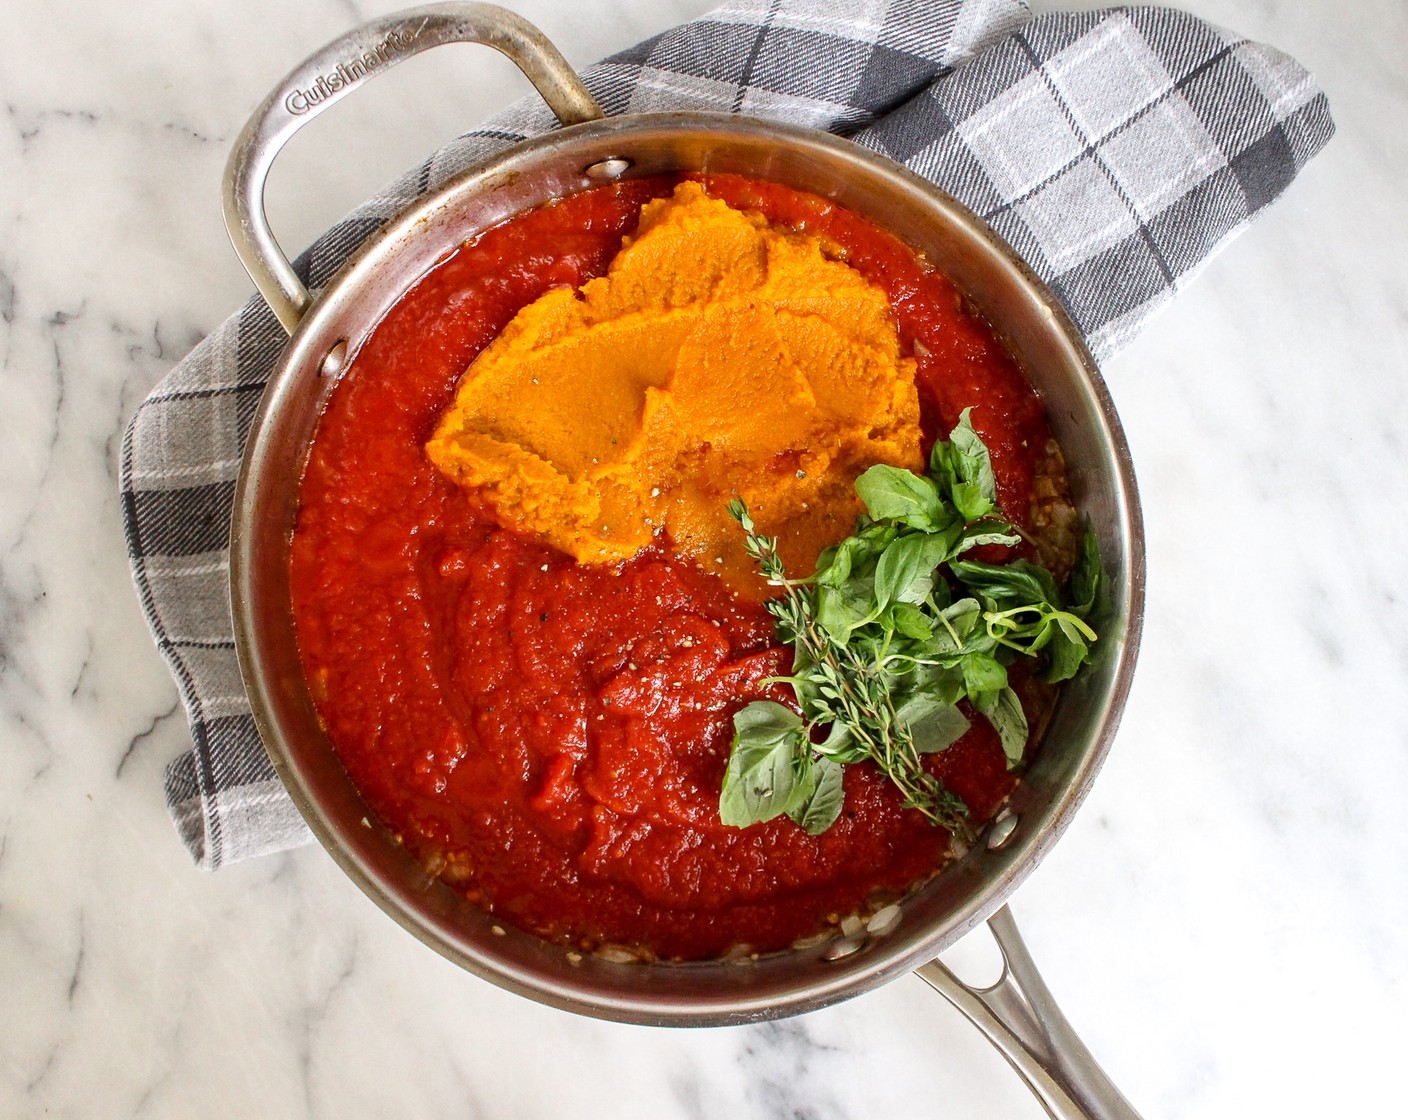 step 4 Add the Crushed Tomatoes (1 can), Pumpkin Purée (1 can), Fresh Basil Leaf (1/2 cup), Fresh Thyme (2 sprigs), Ground Cinnamon (1/2 tsp), Italian Seasoning (1 Tbsp), ¼ teaspoon salt, and Ground Black Pepper (1/4 tsp). Add ½-1 cup Vegetable Stock (1 cup) to thin out sauce, as needed. Mix together until simmering, then add the cooked lentils.